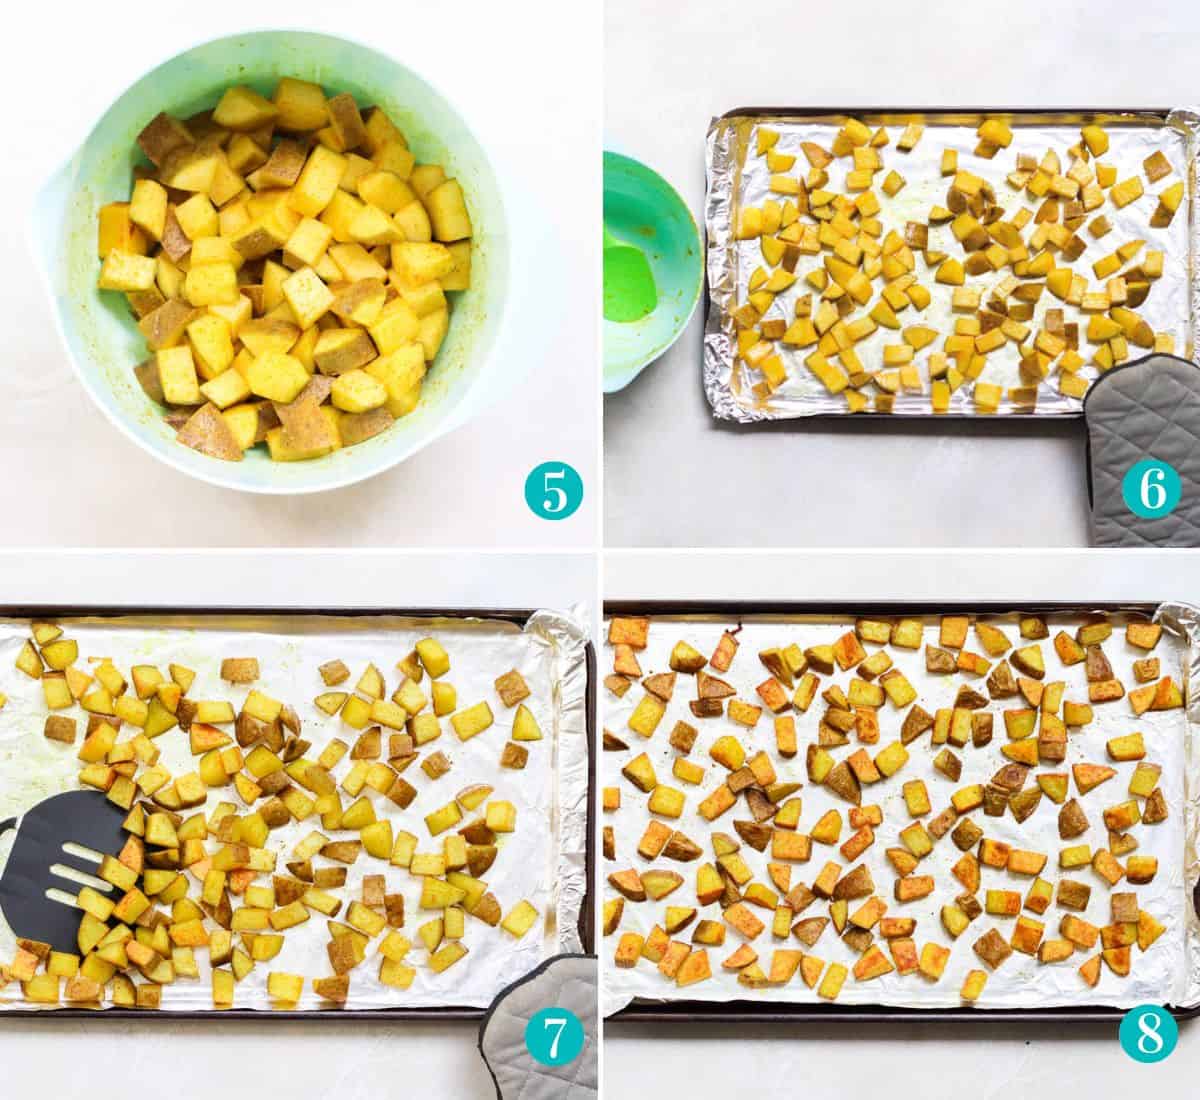 four photo collage with potatoes covered in spices in a blue mixing bowl, potatoes on a foil-lined baking sheet, potatoes being stirred by a black spatula halfway through roasting, and finished roasted potatoes on the baking sheet.